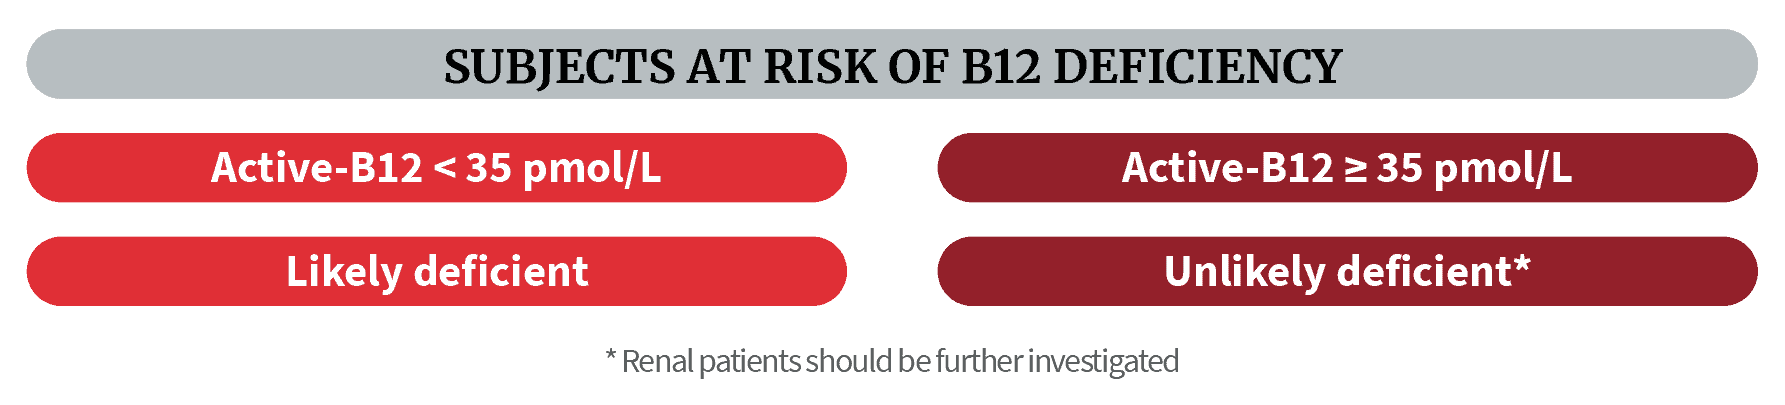 Active-B12 test results